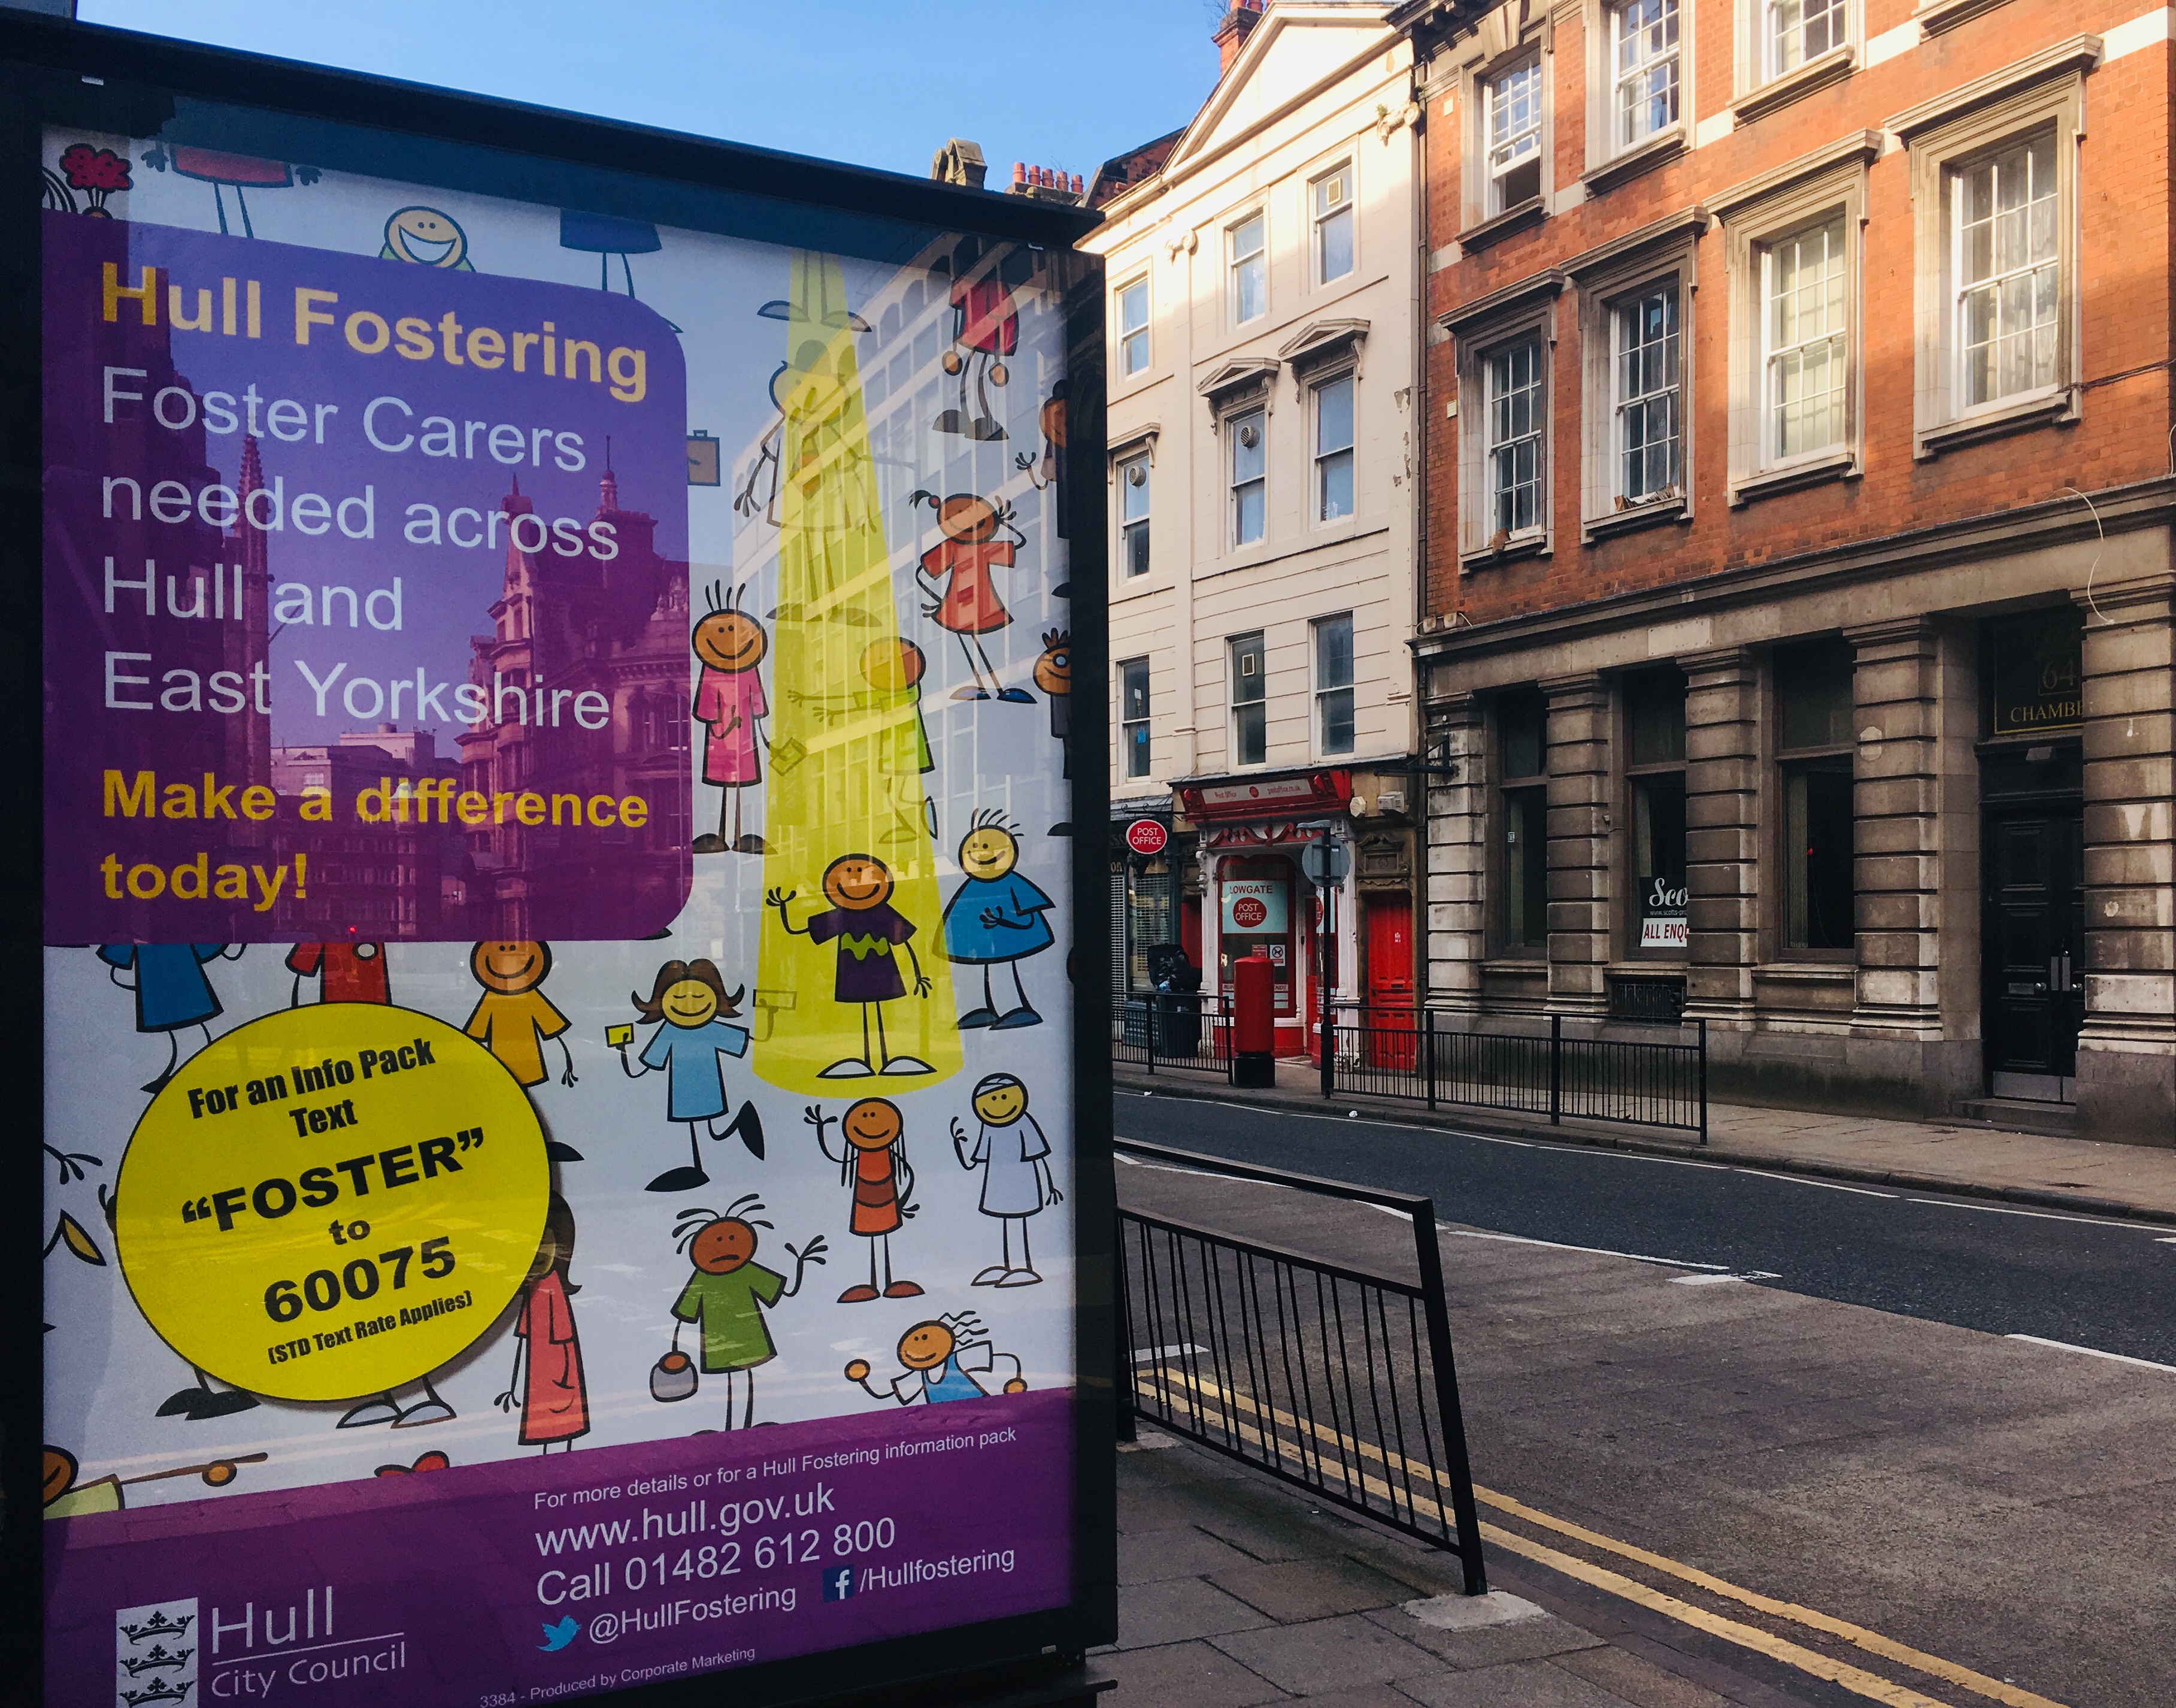 Almost 500 children are in foster care in Hull Fostering. 